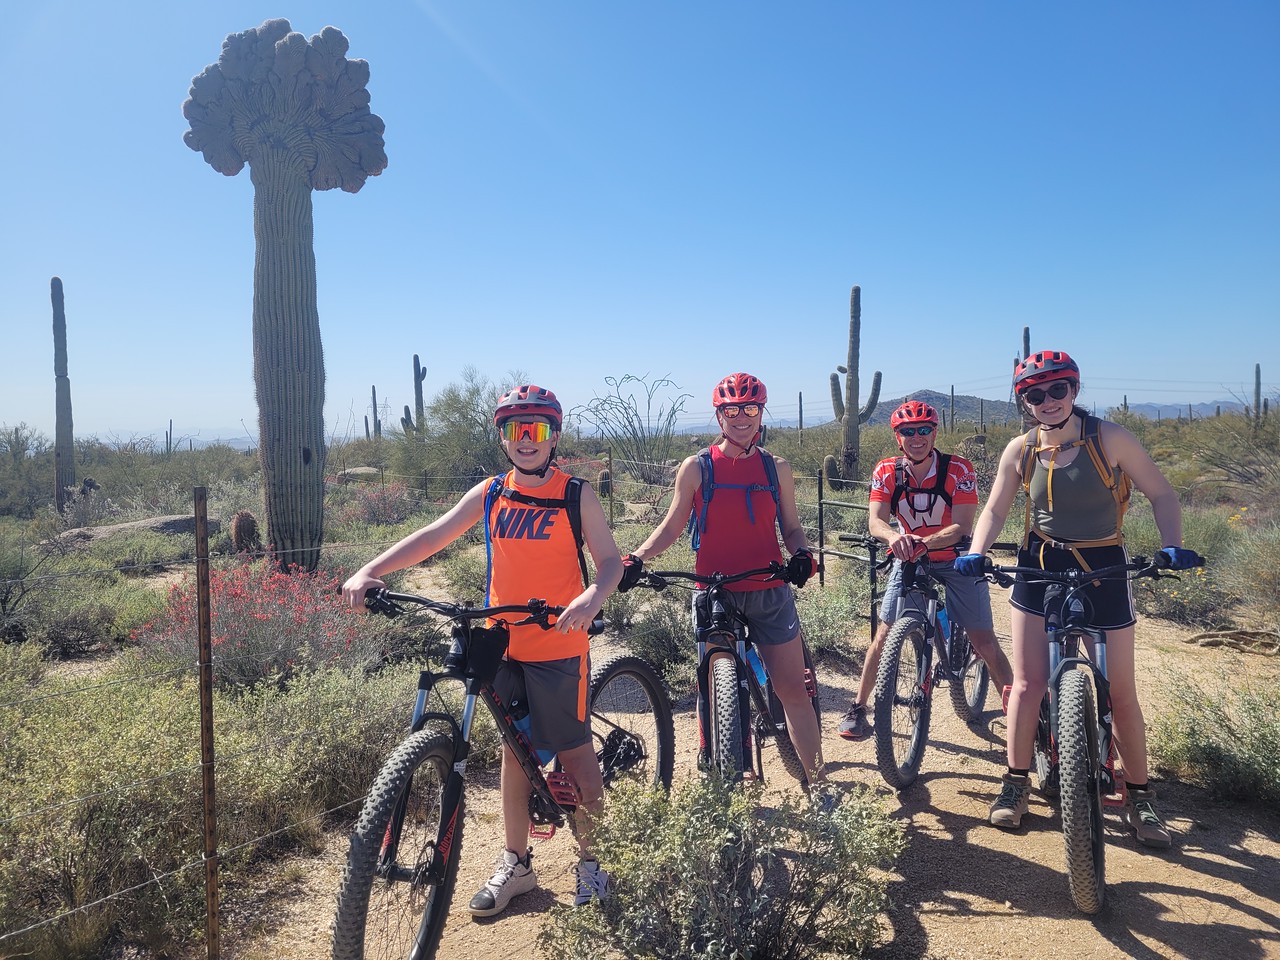 A father (third from the left) and his children enjoy one of the Phoenix mountain bike tours from the Wild Bunch Desert Guides.